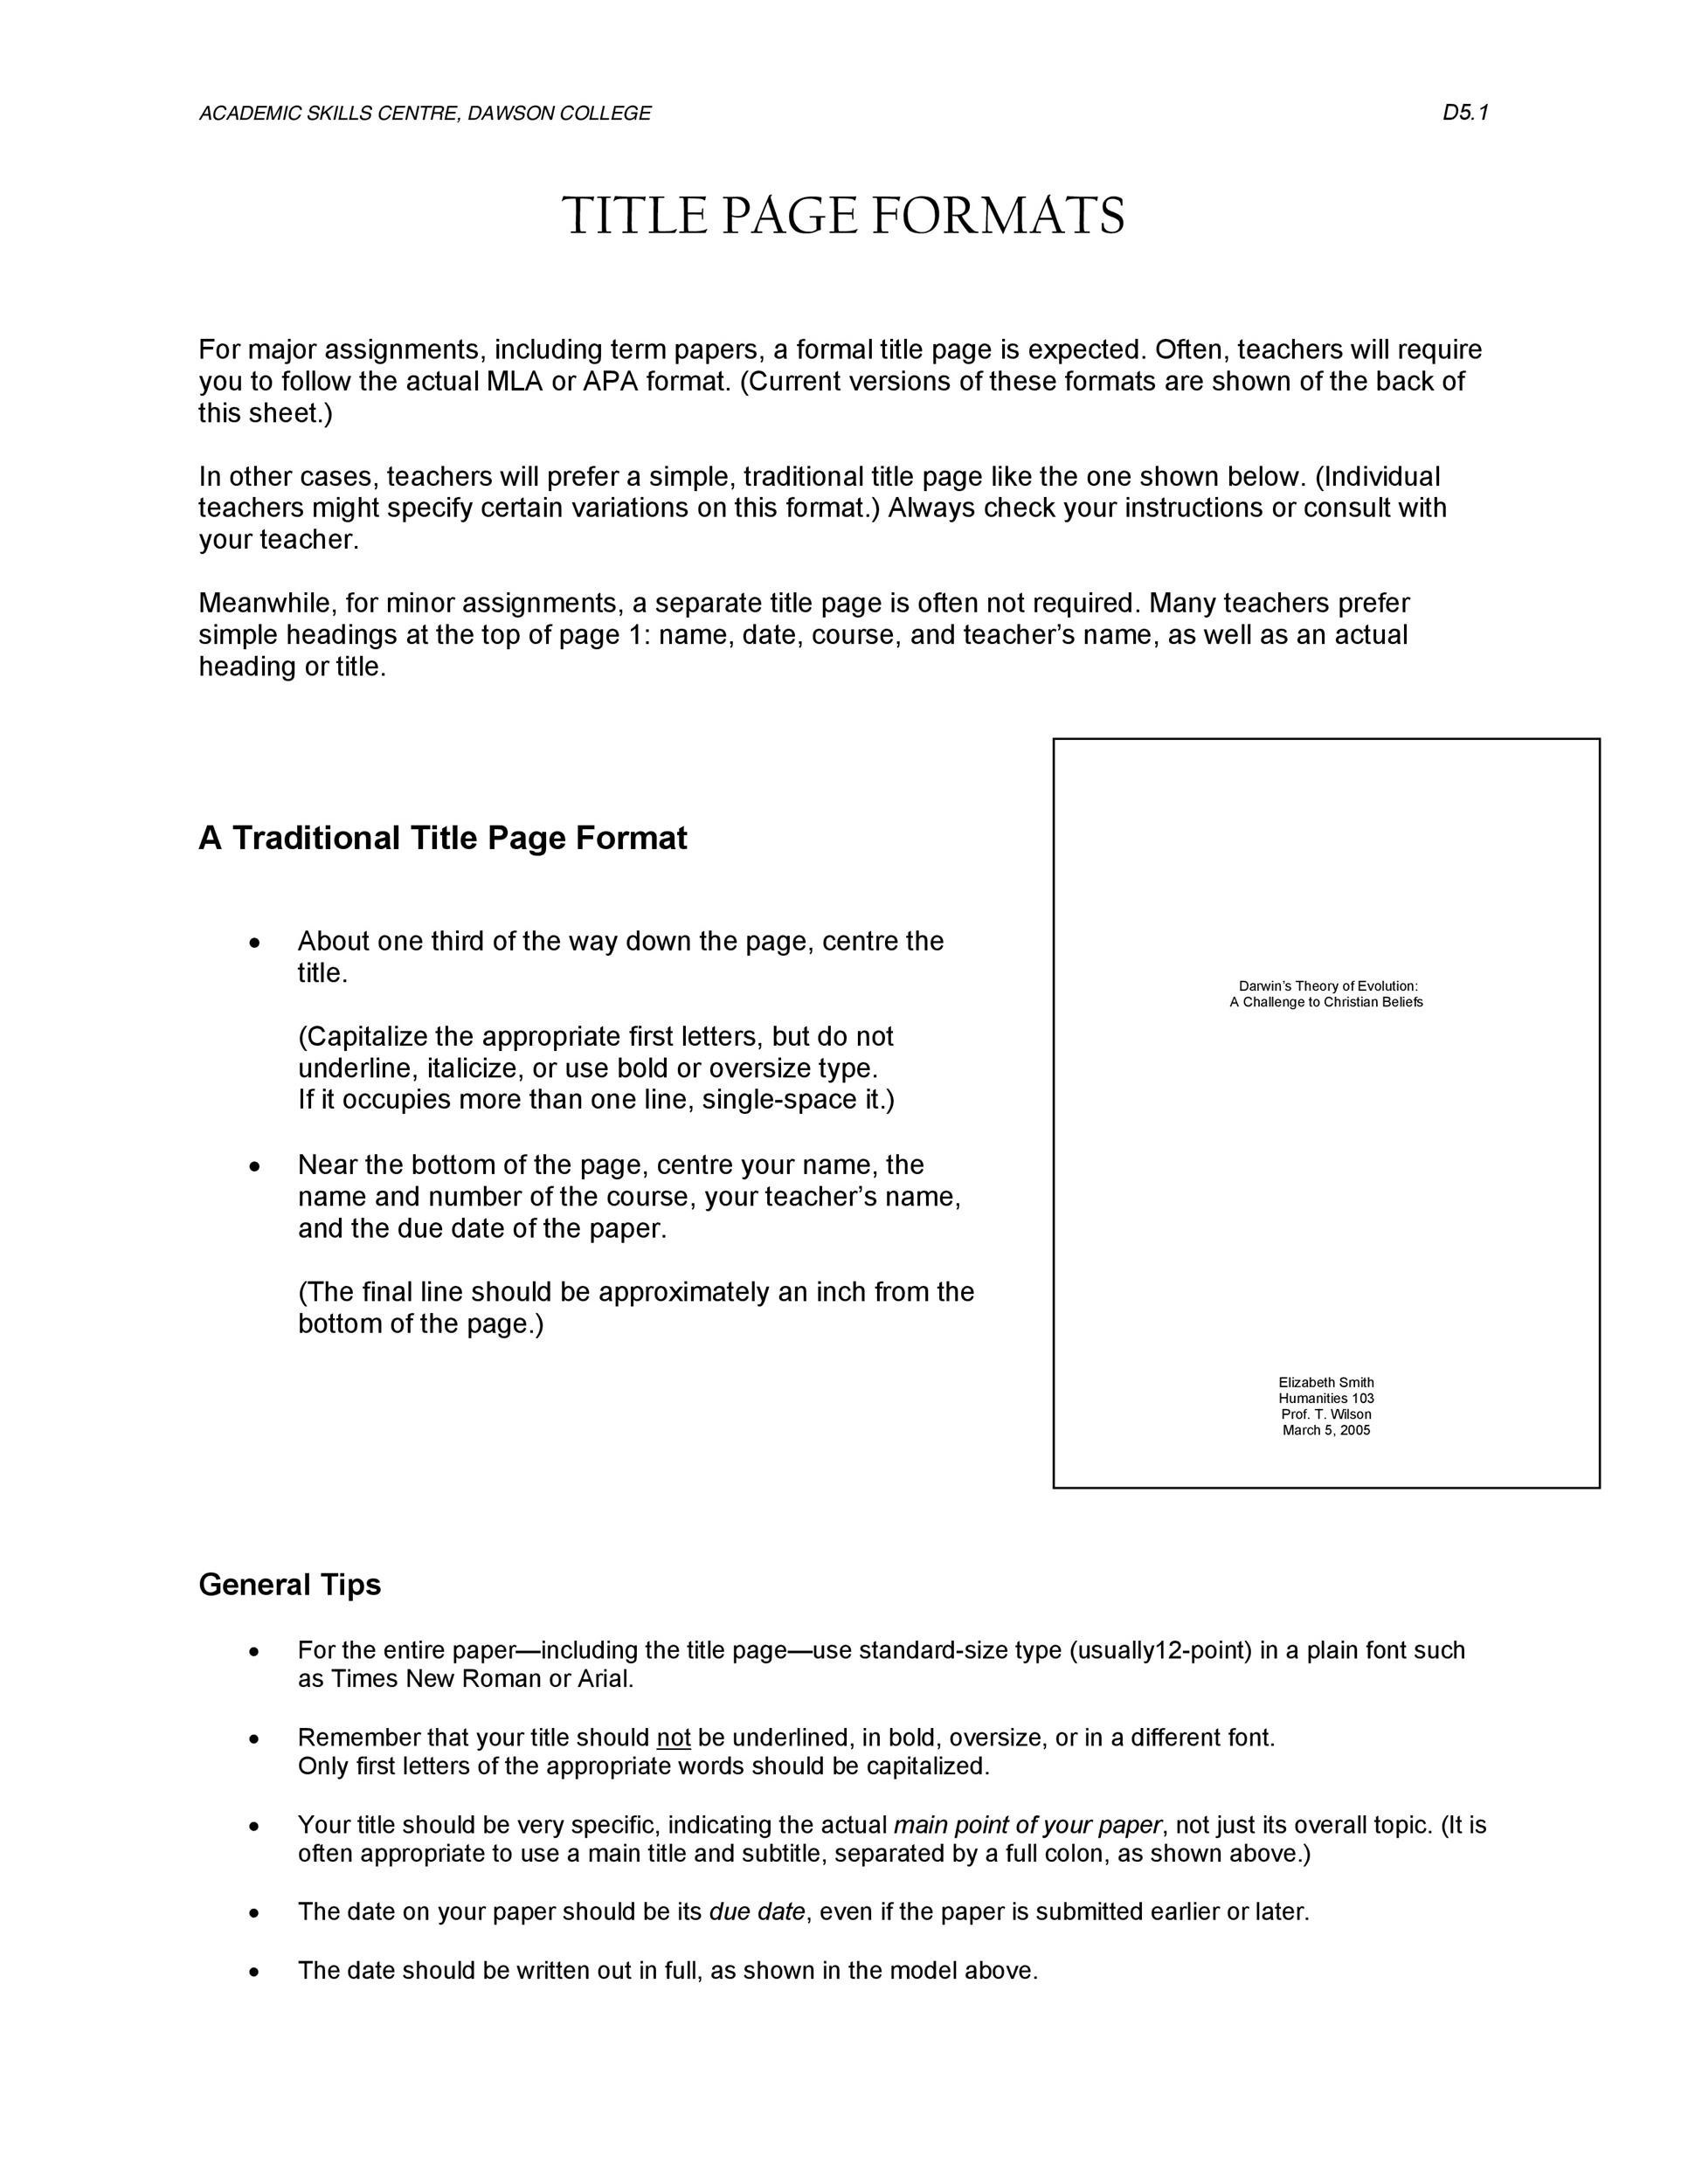 apa-7th-edition-template-for-microsoft-word